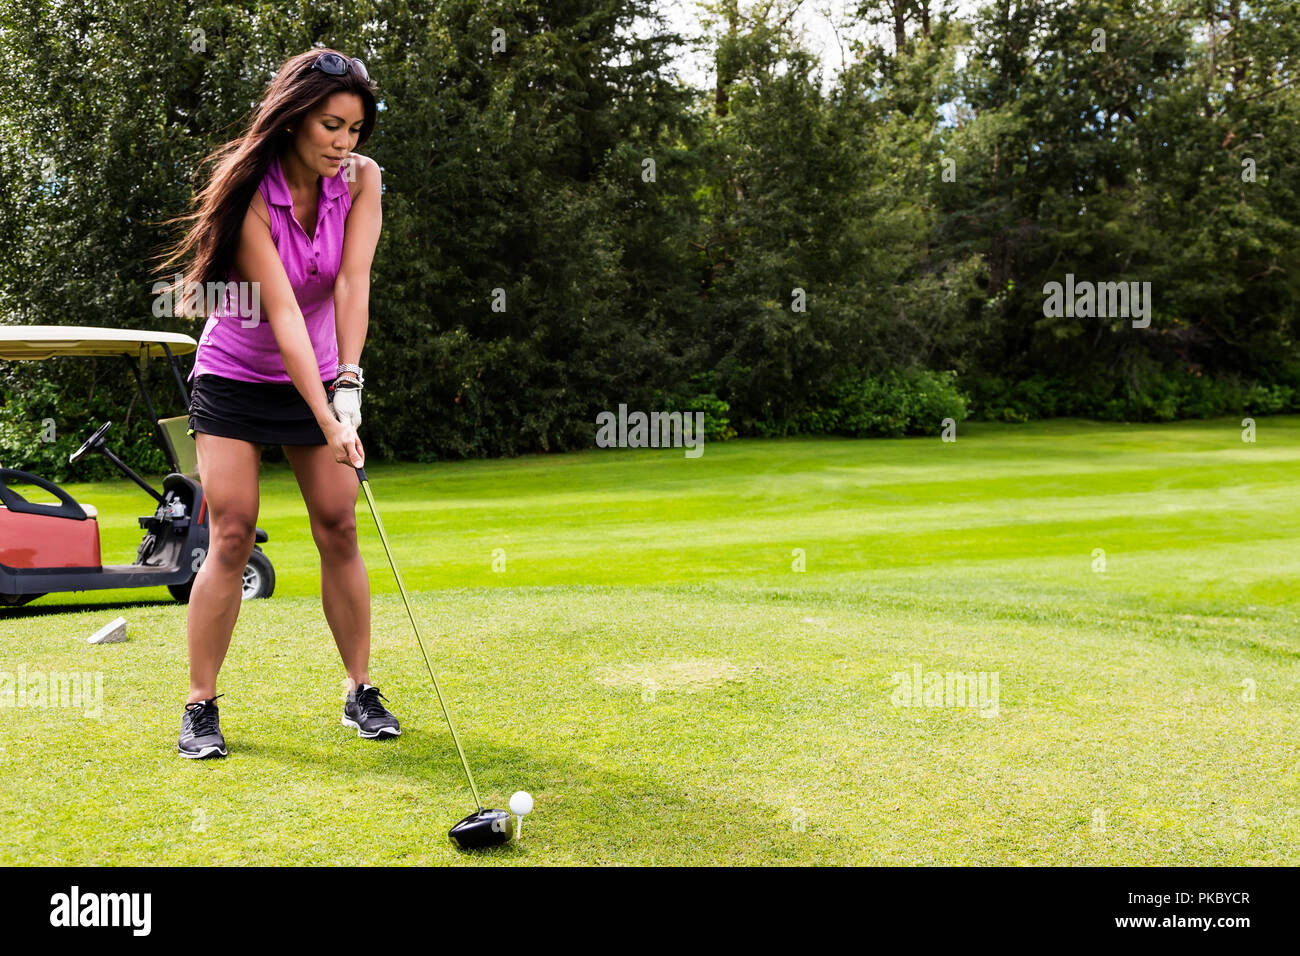 A female golfer lines up her driver to the golf ball as she sets up her shot on a tee; Edmonton, Alberta, Canada Stock Photo